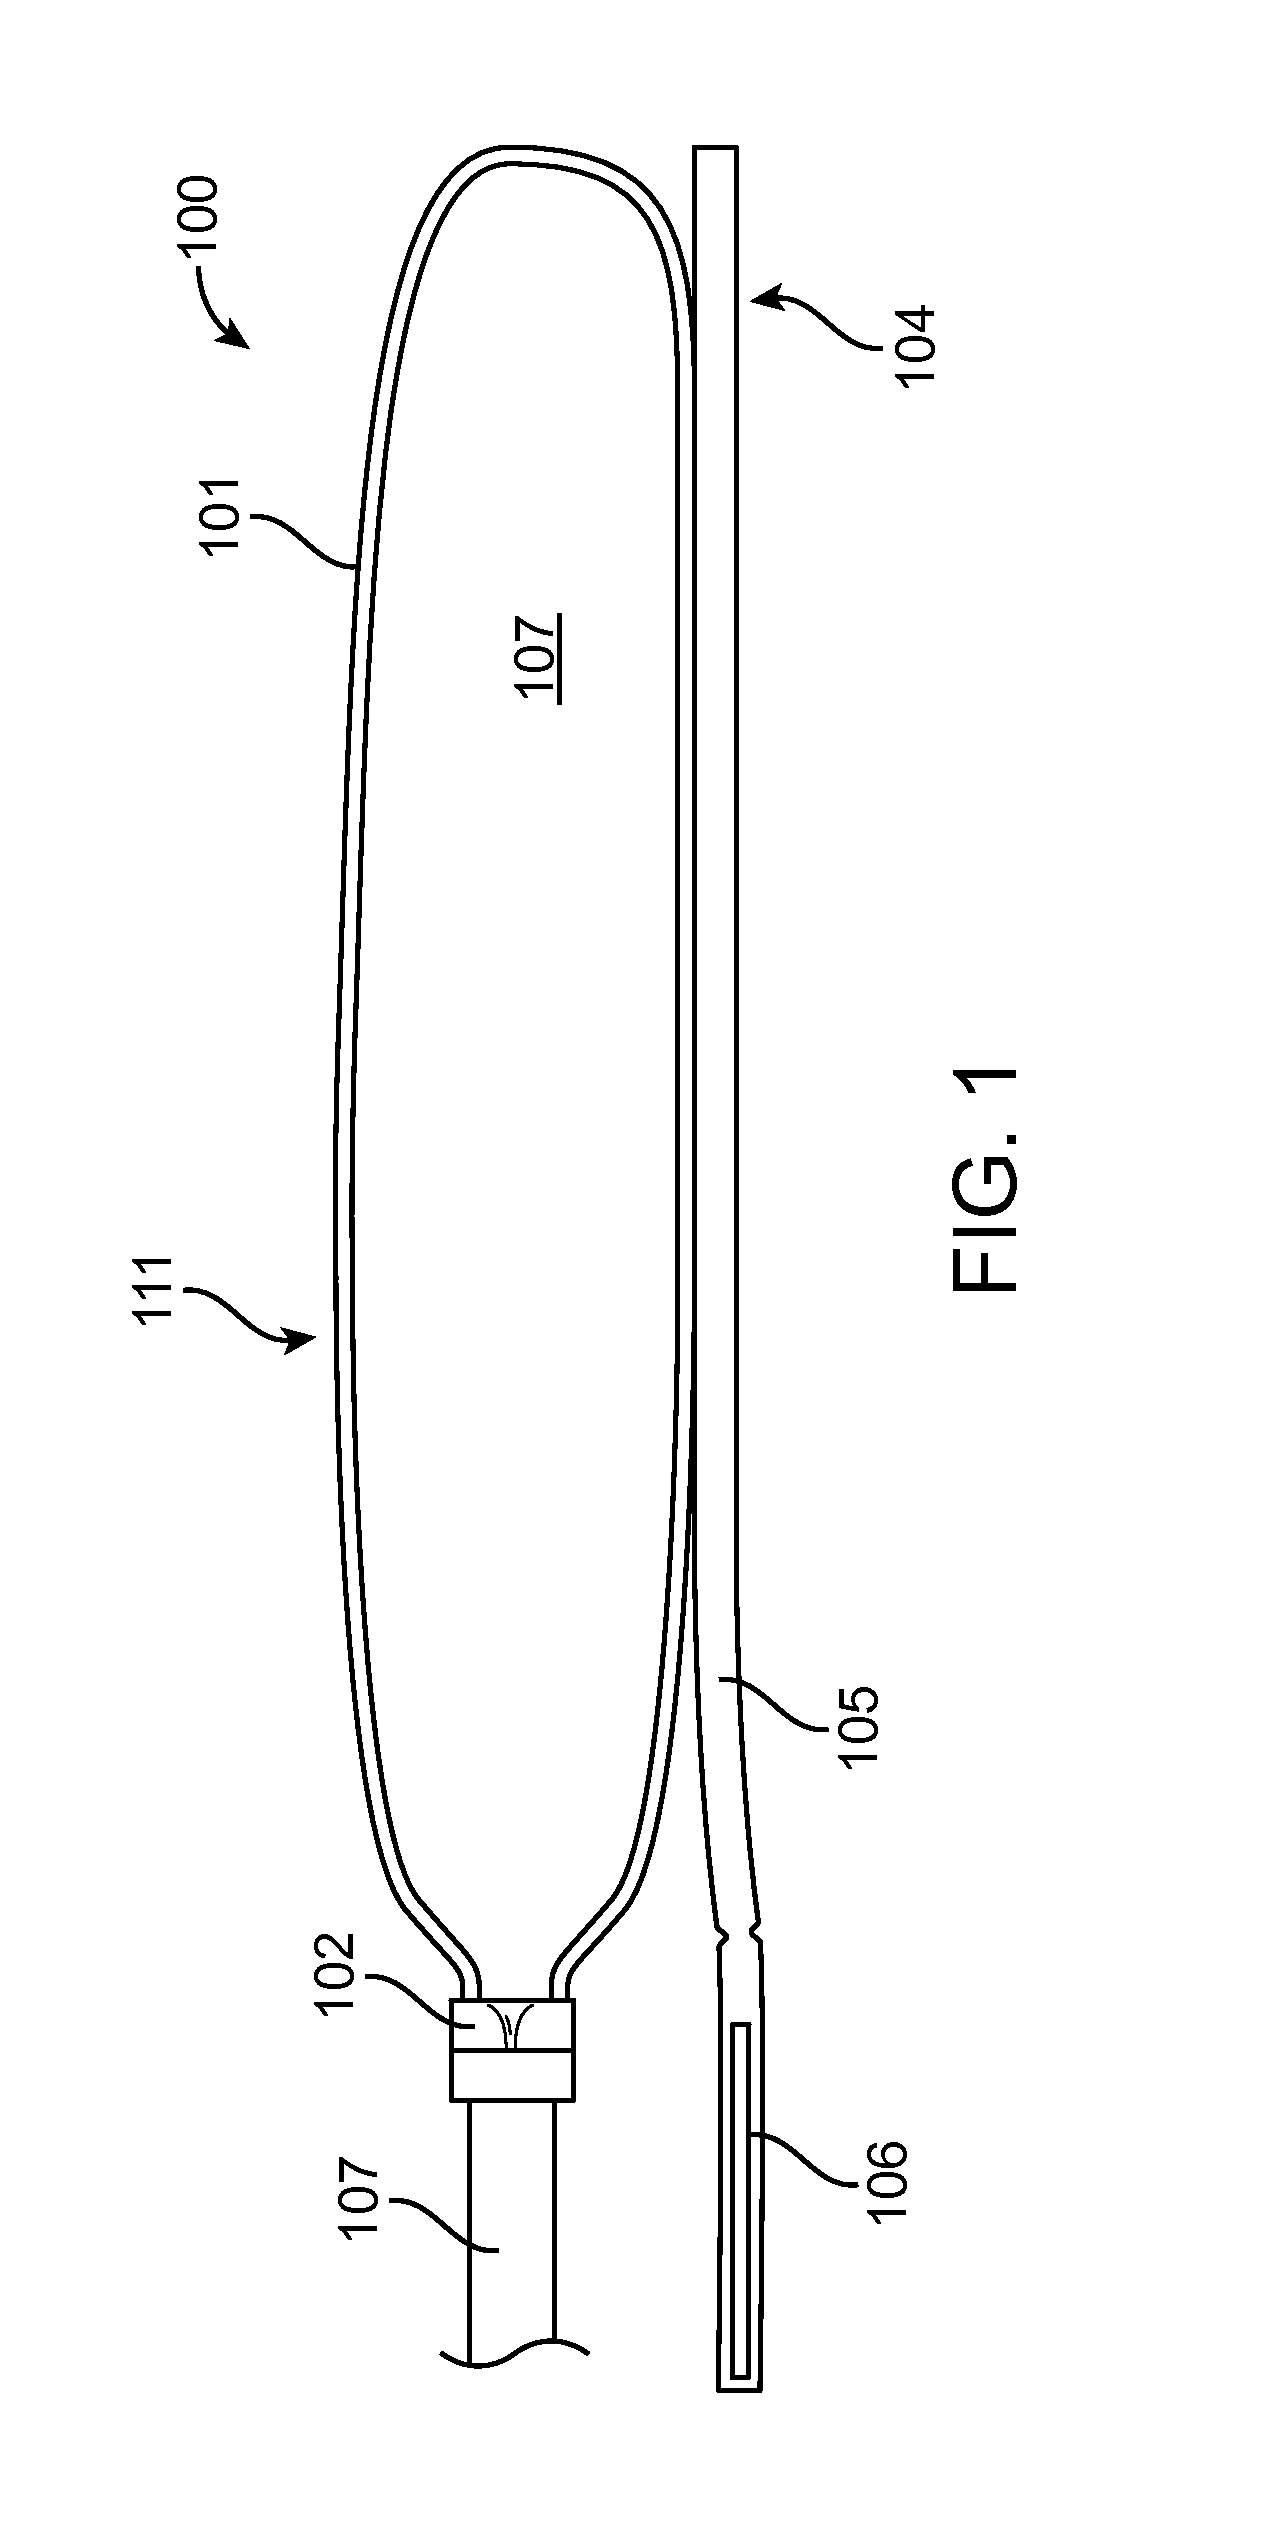 Methods of transcutaneous heat transfer, and devices and systems for use in the same